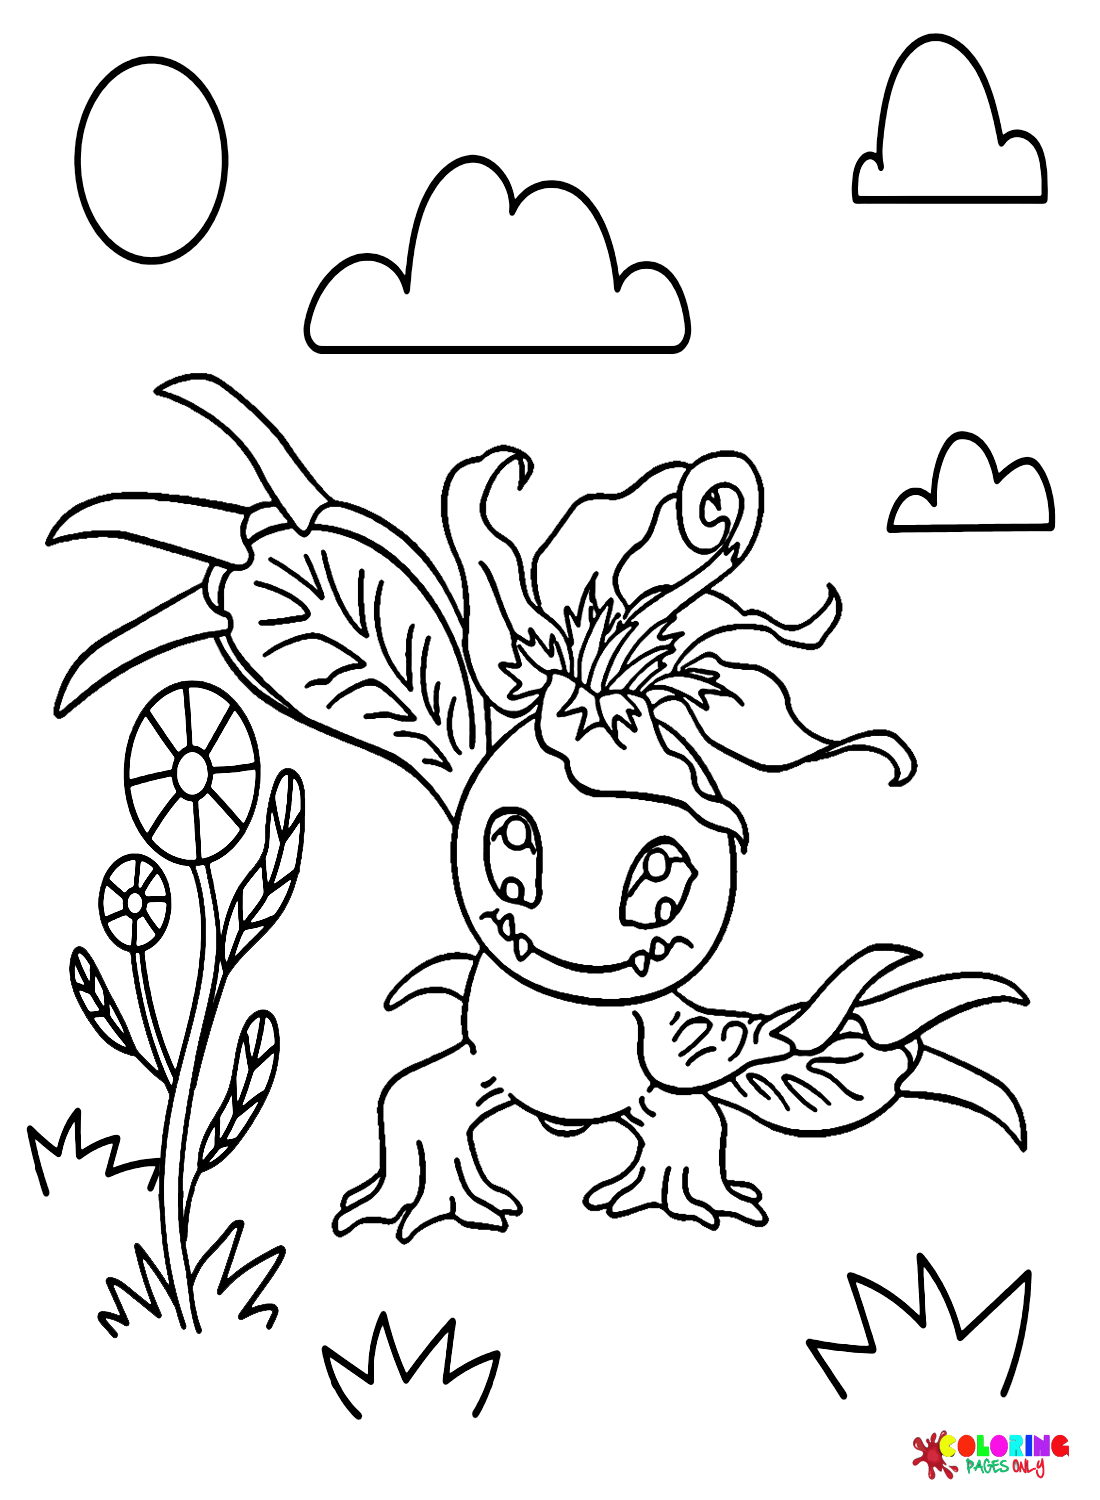 Palmon Monster Coloring Page